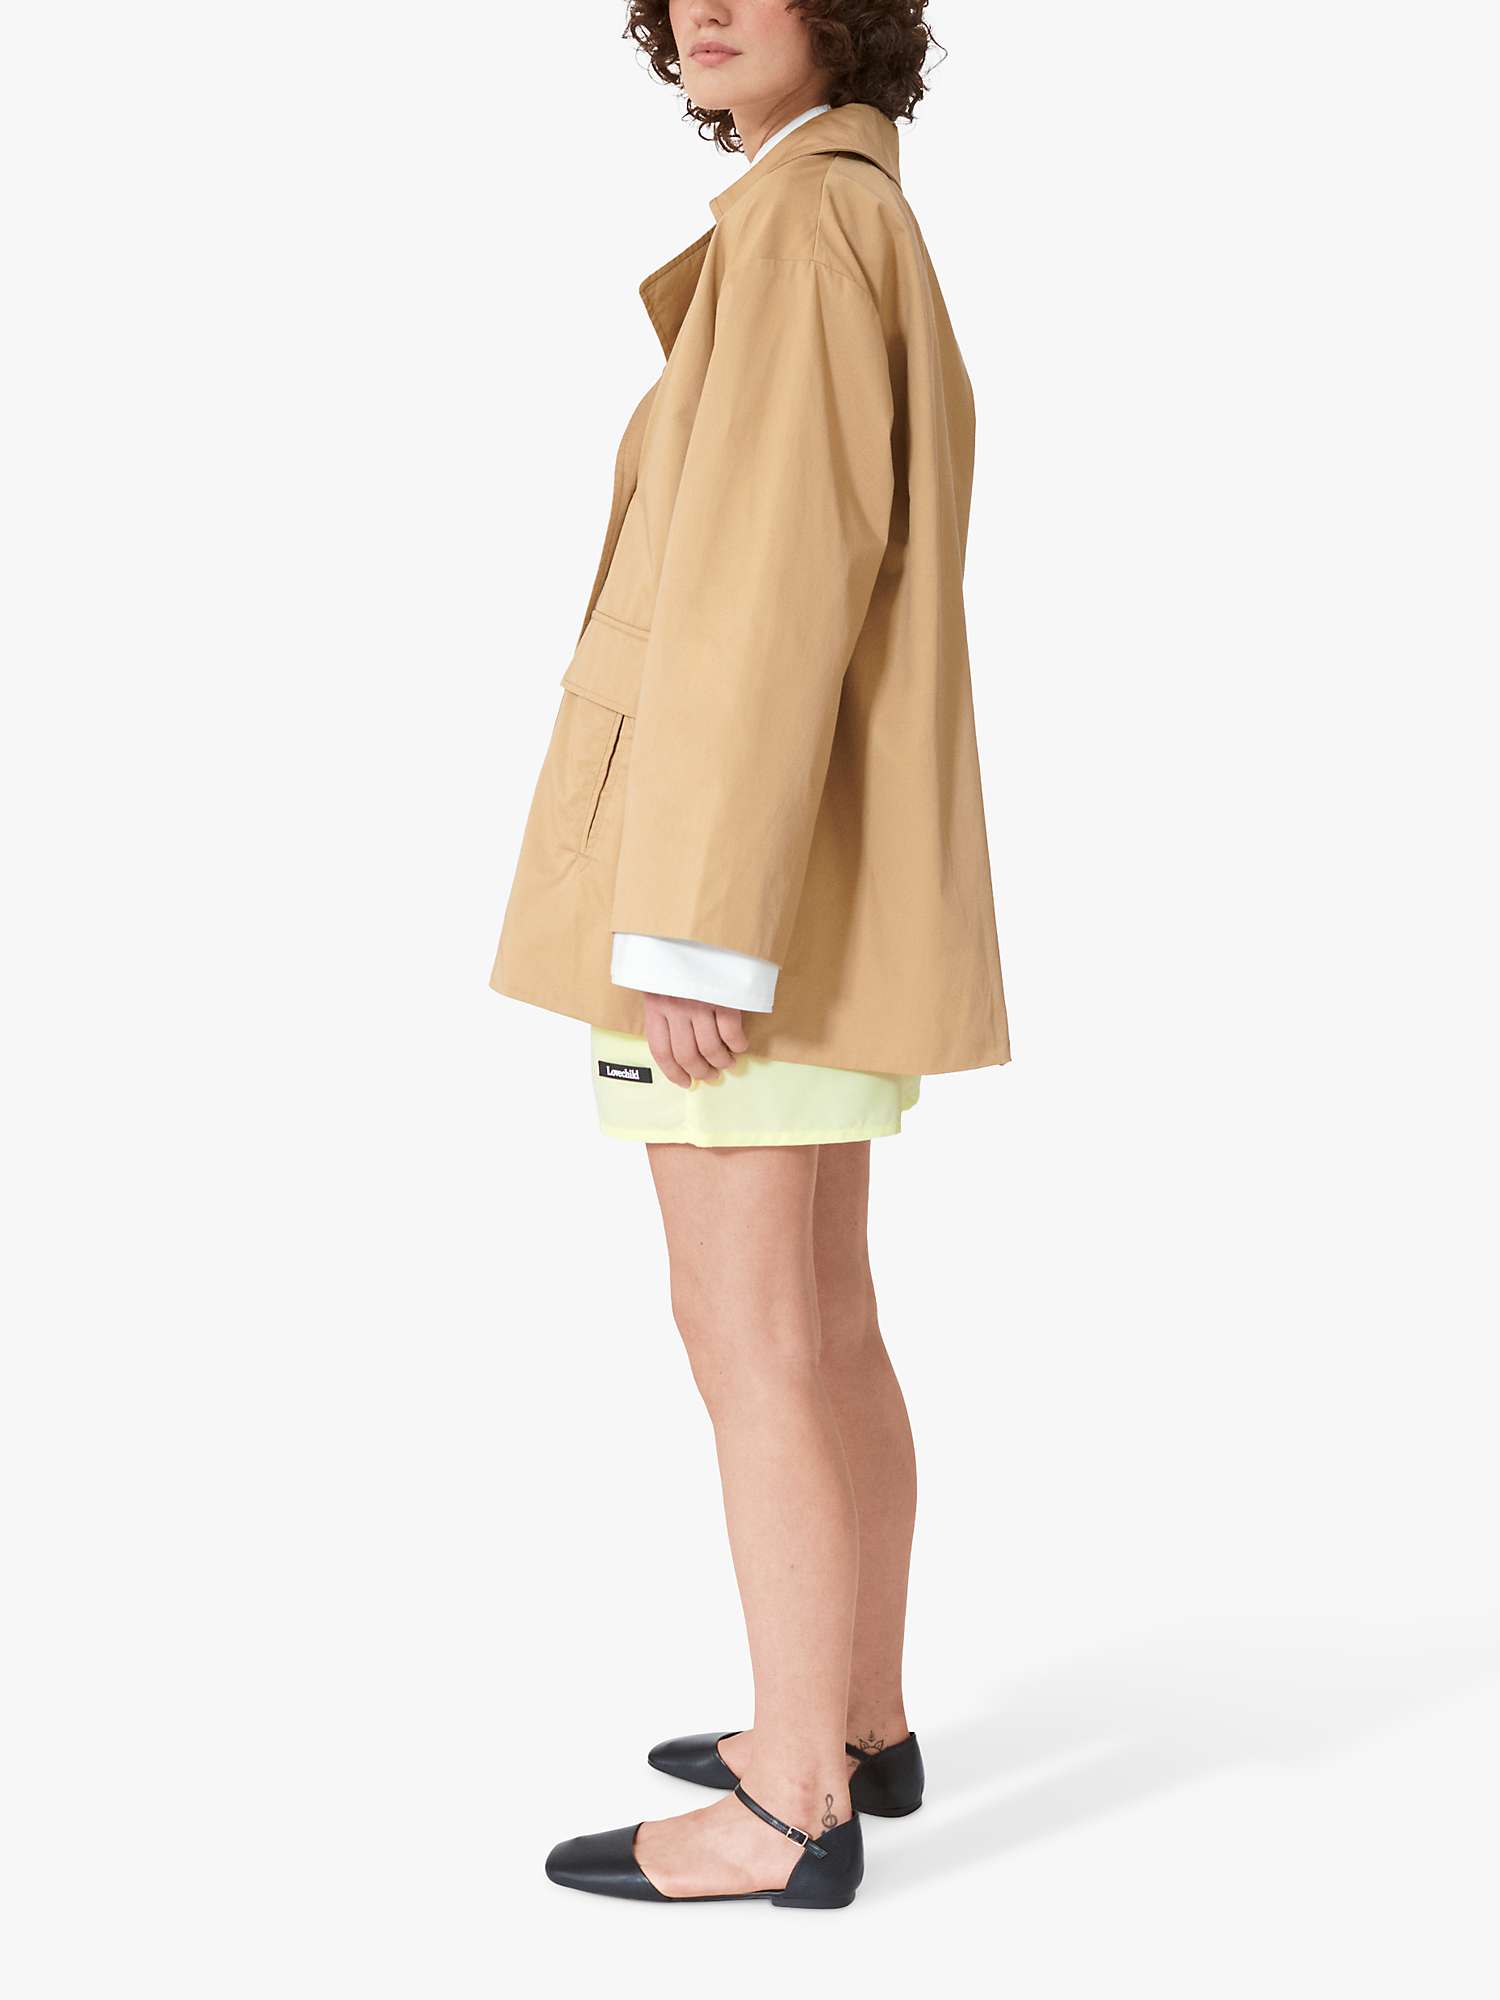 Buy Lovechild 1979 Ailani Double Breasted Jacket, Dark Sand Online at johnlewis.com